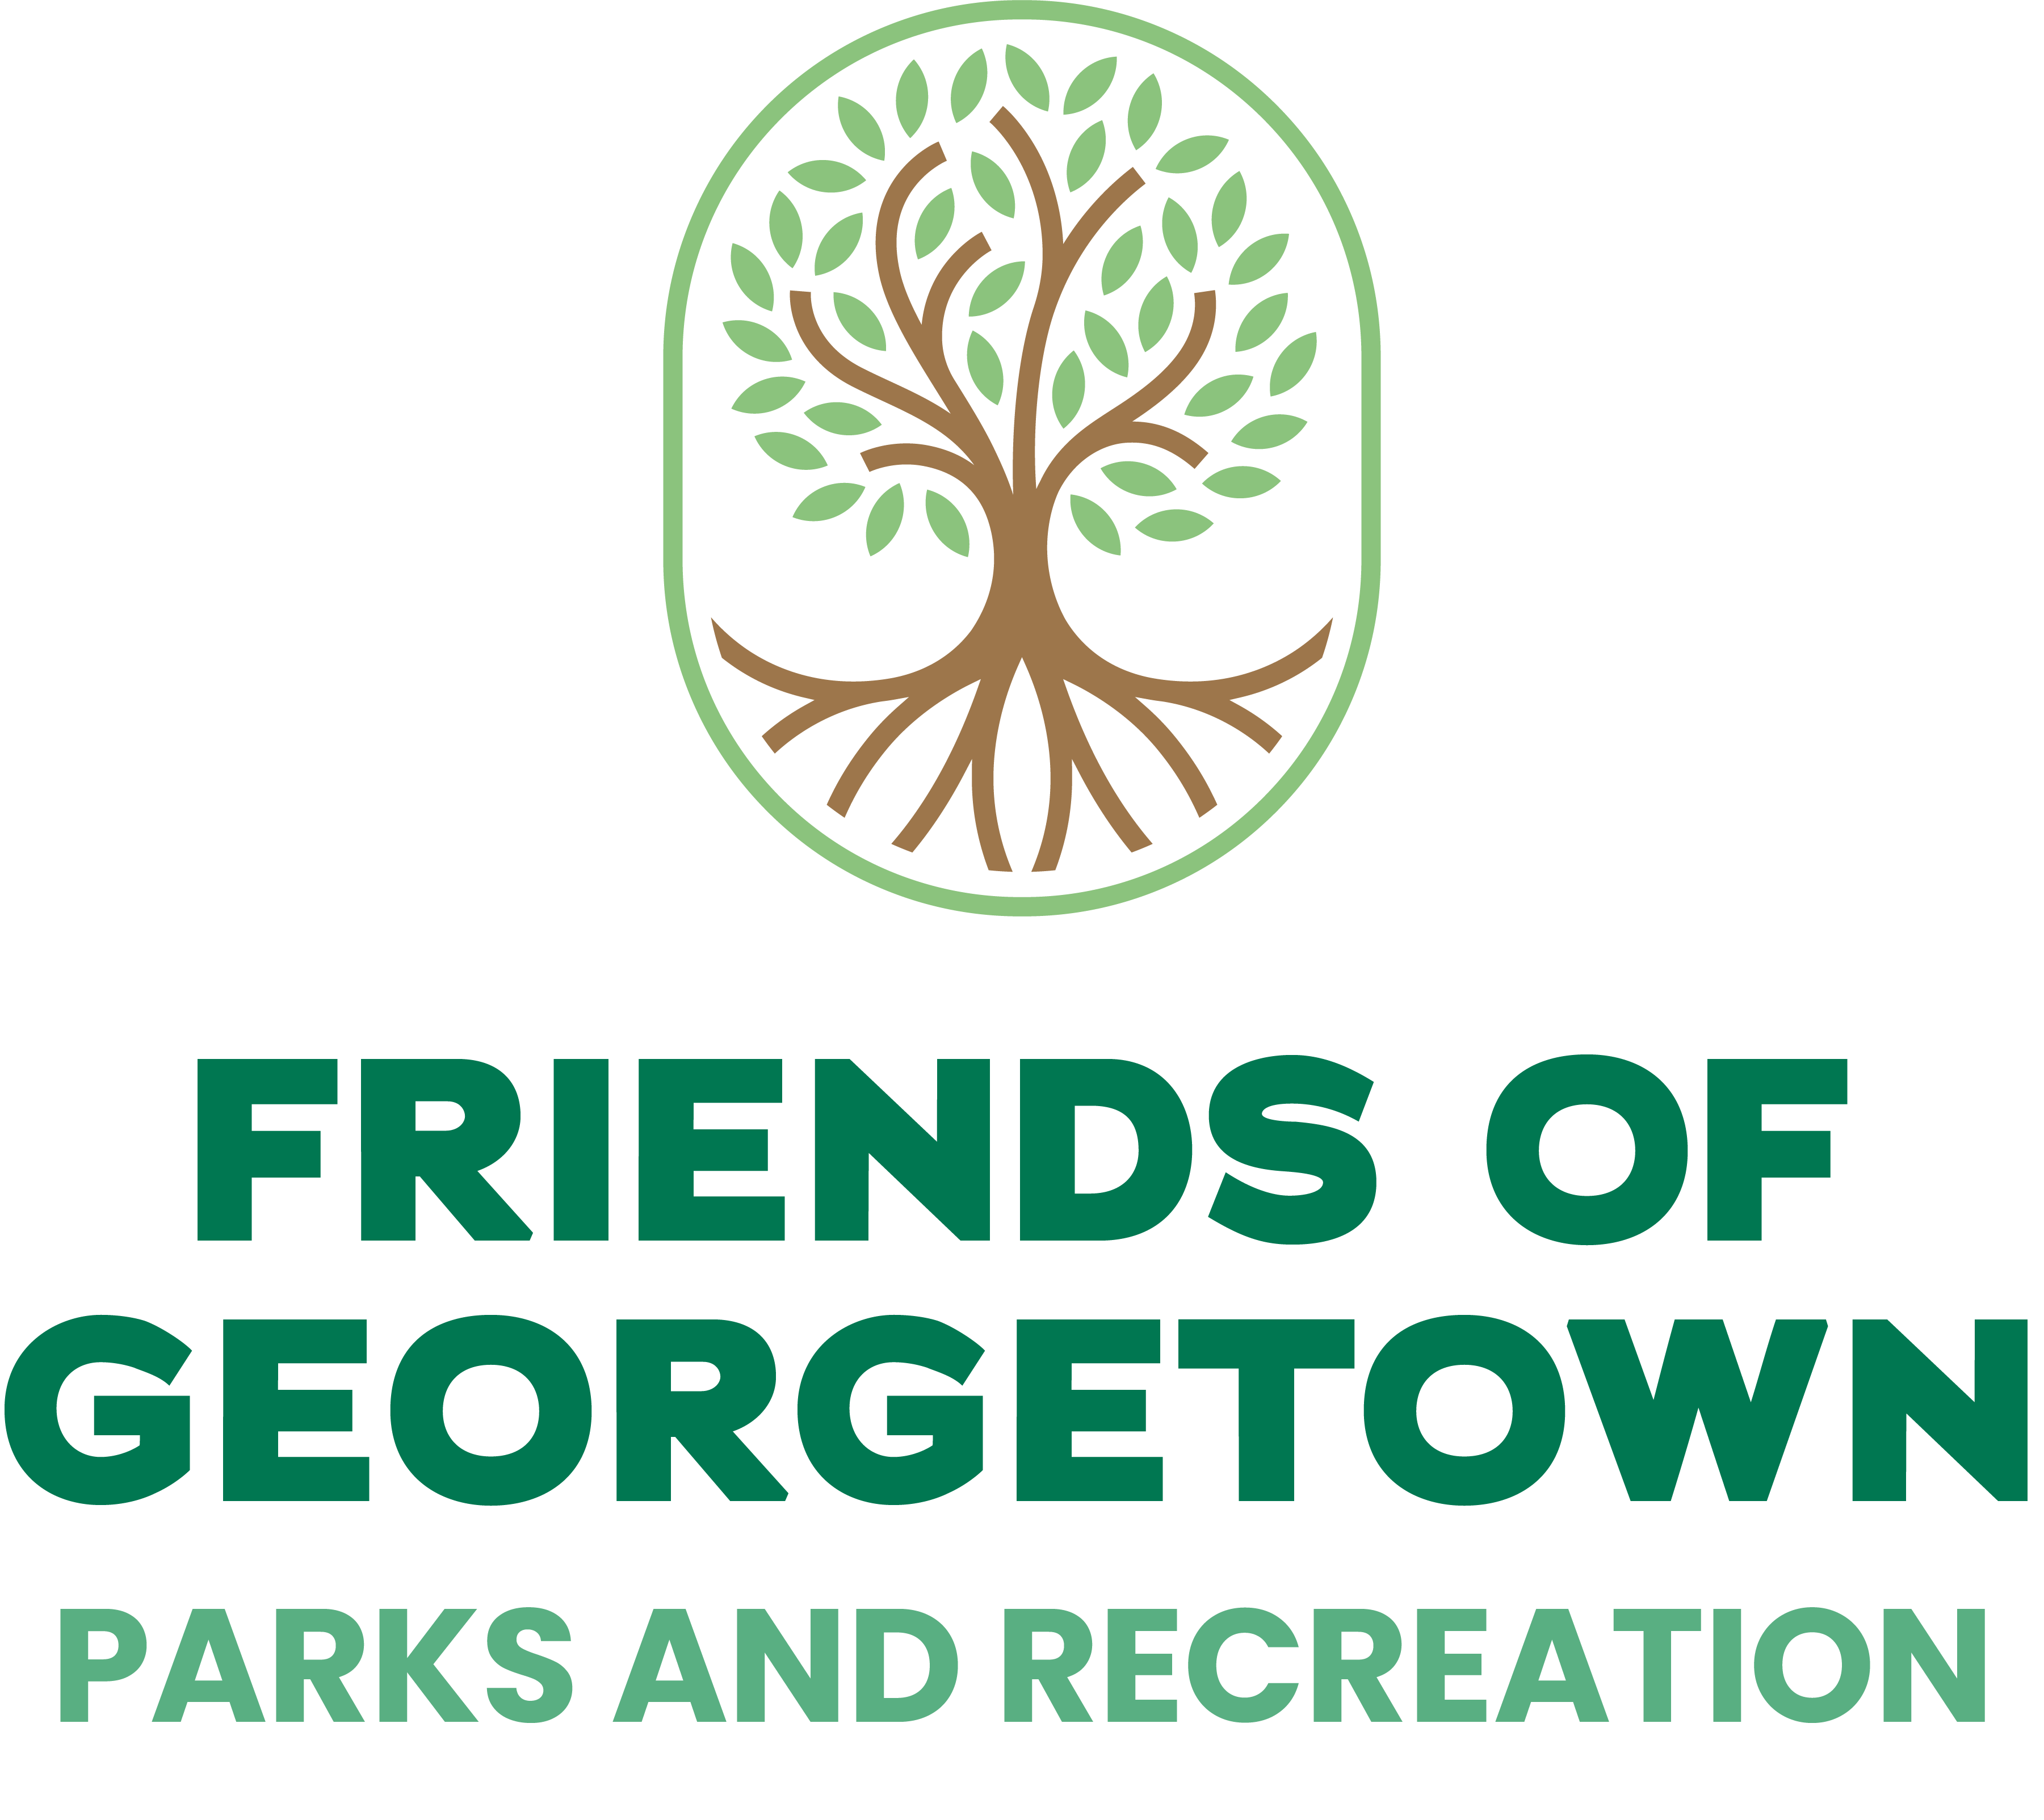 Friends of Georgetown Parks and Recreation